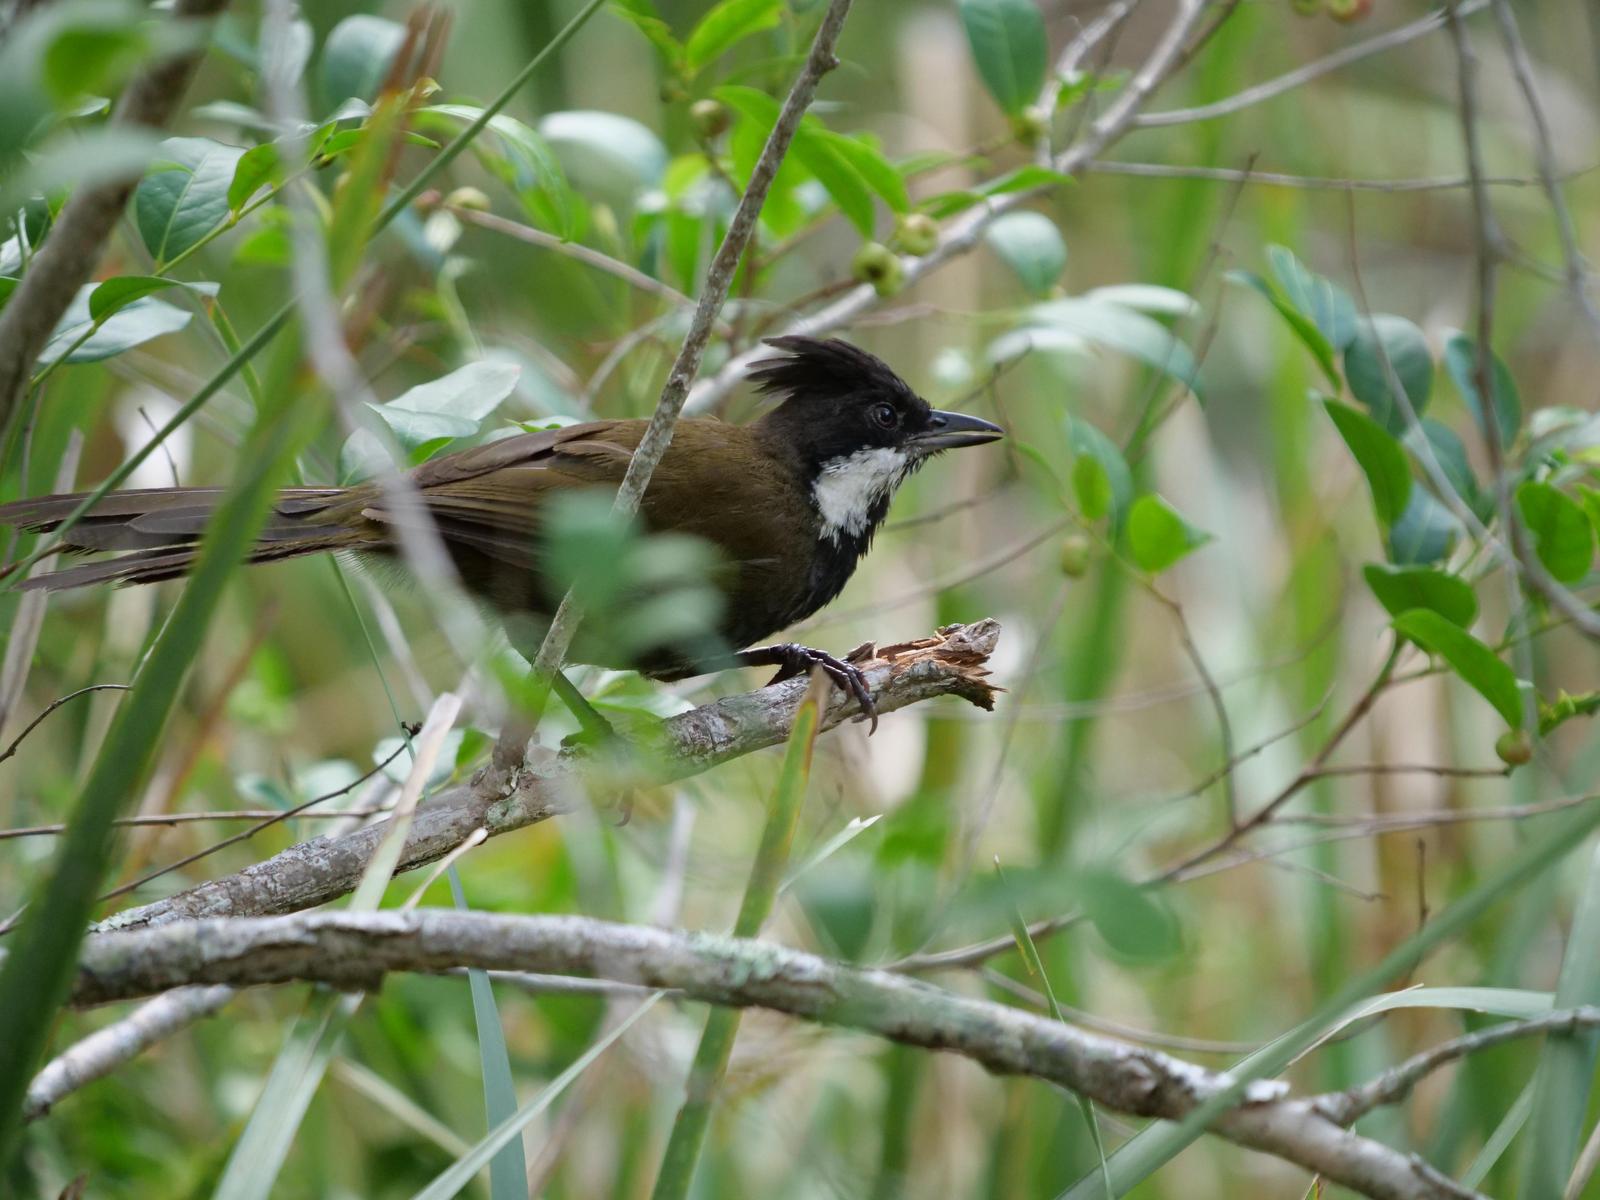 Eastern Whipbird Photo by Peter Lowe